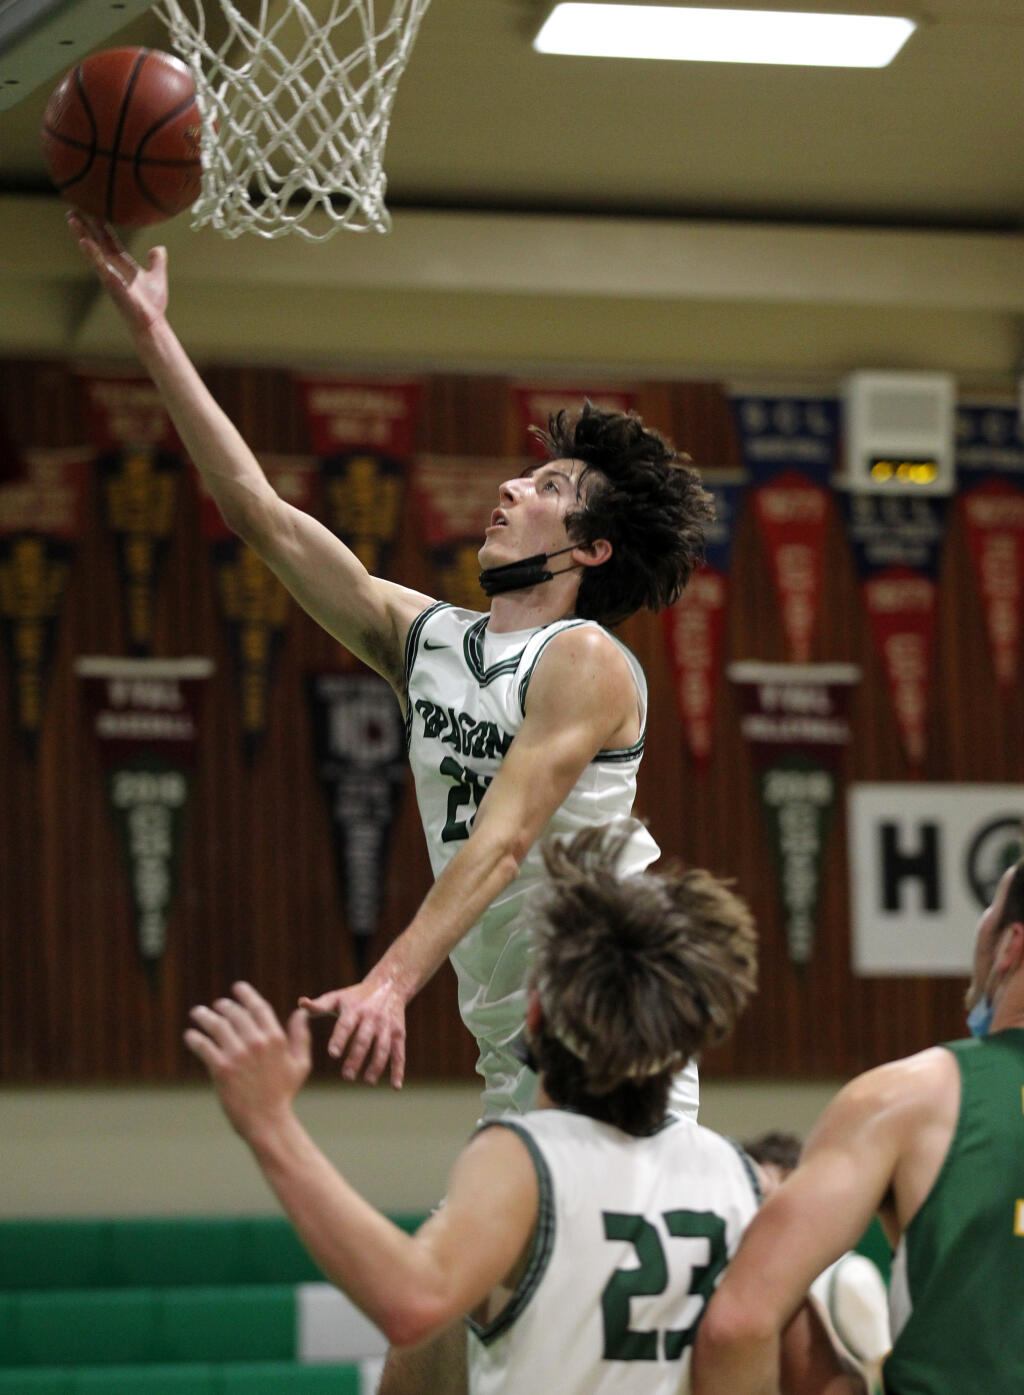 Sonoma Valley's Dom Girish (20) scores against Casa Grande in the first half of basketball at Sonoma Valley High School, in Sonoma, Calif., on Thursday, January 20, 2022. (Photo by Darryl Bush / For The Press Democrat)